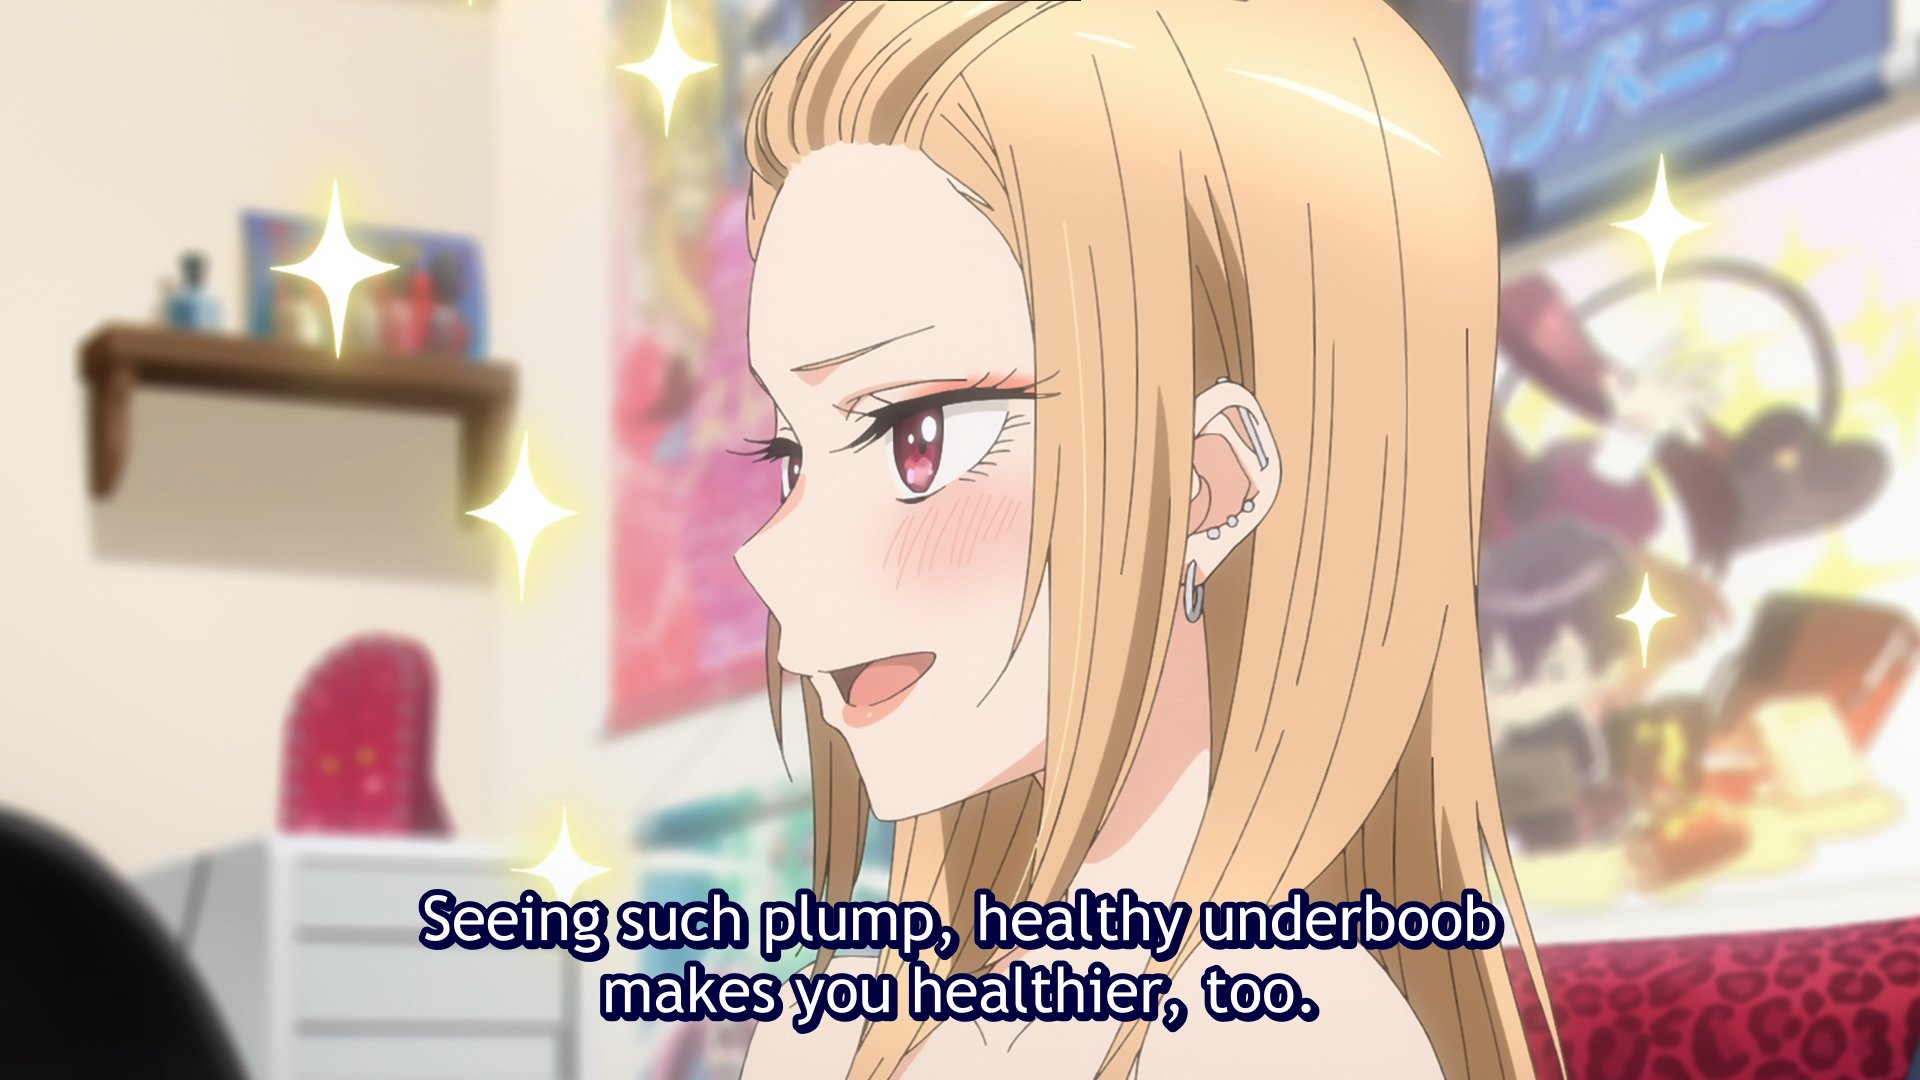 Screenshot of Marin from My Dress-Up Darling. Subtitle reads: "Seeing such plump, healthy underboob makes you healthier, too."